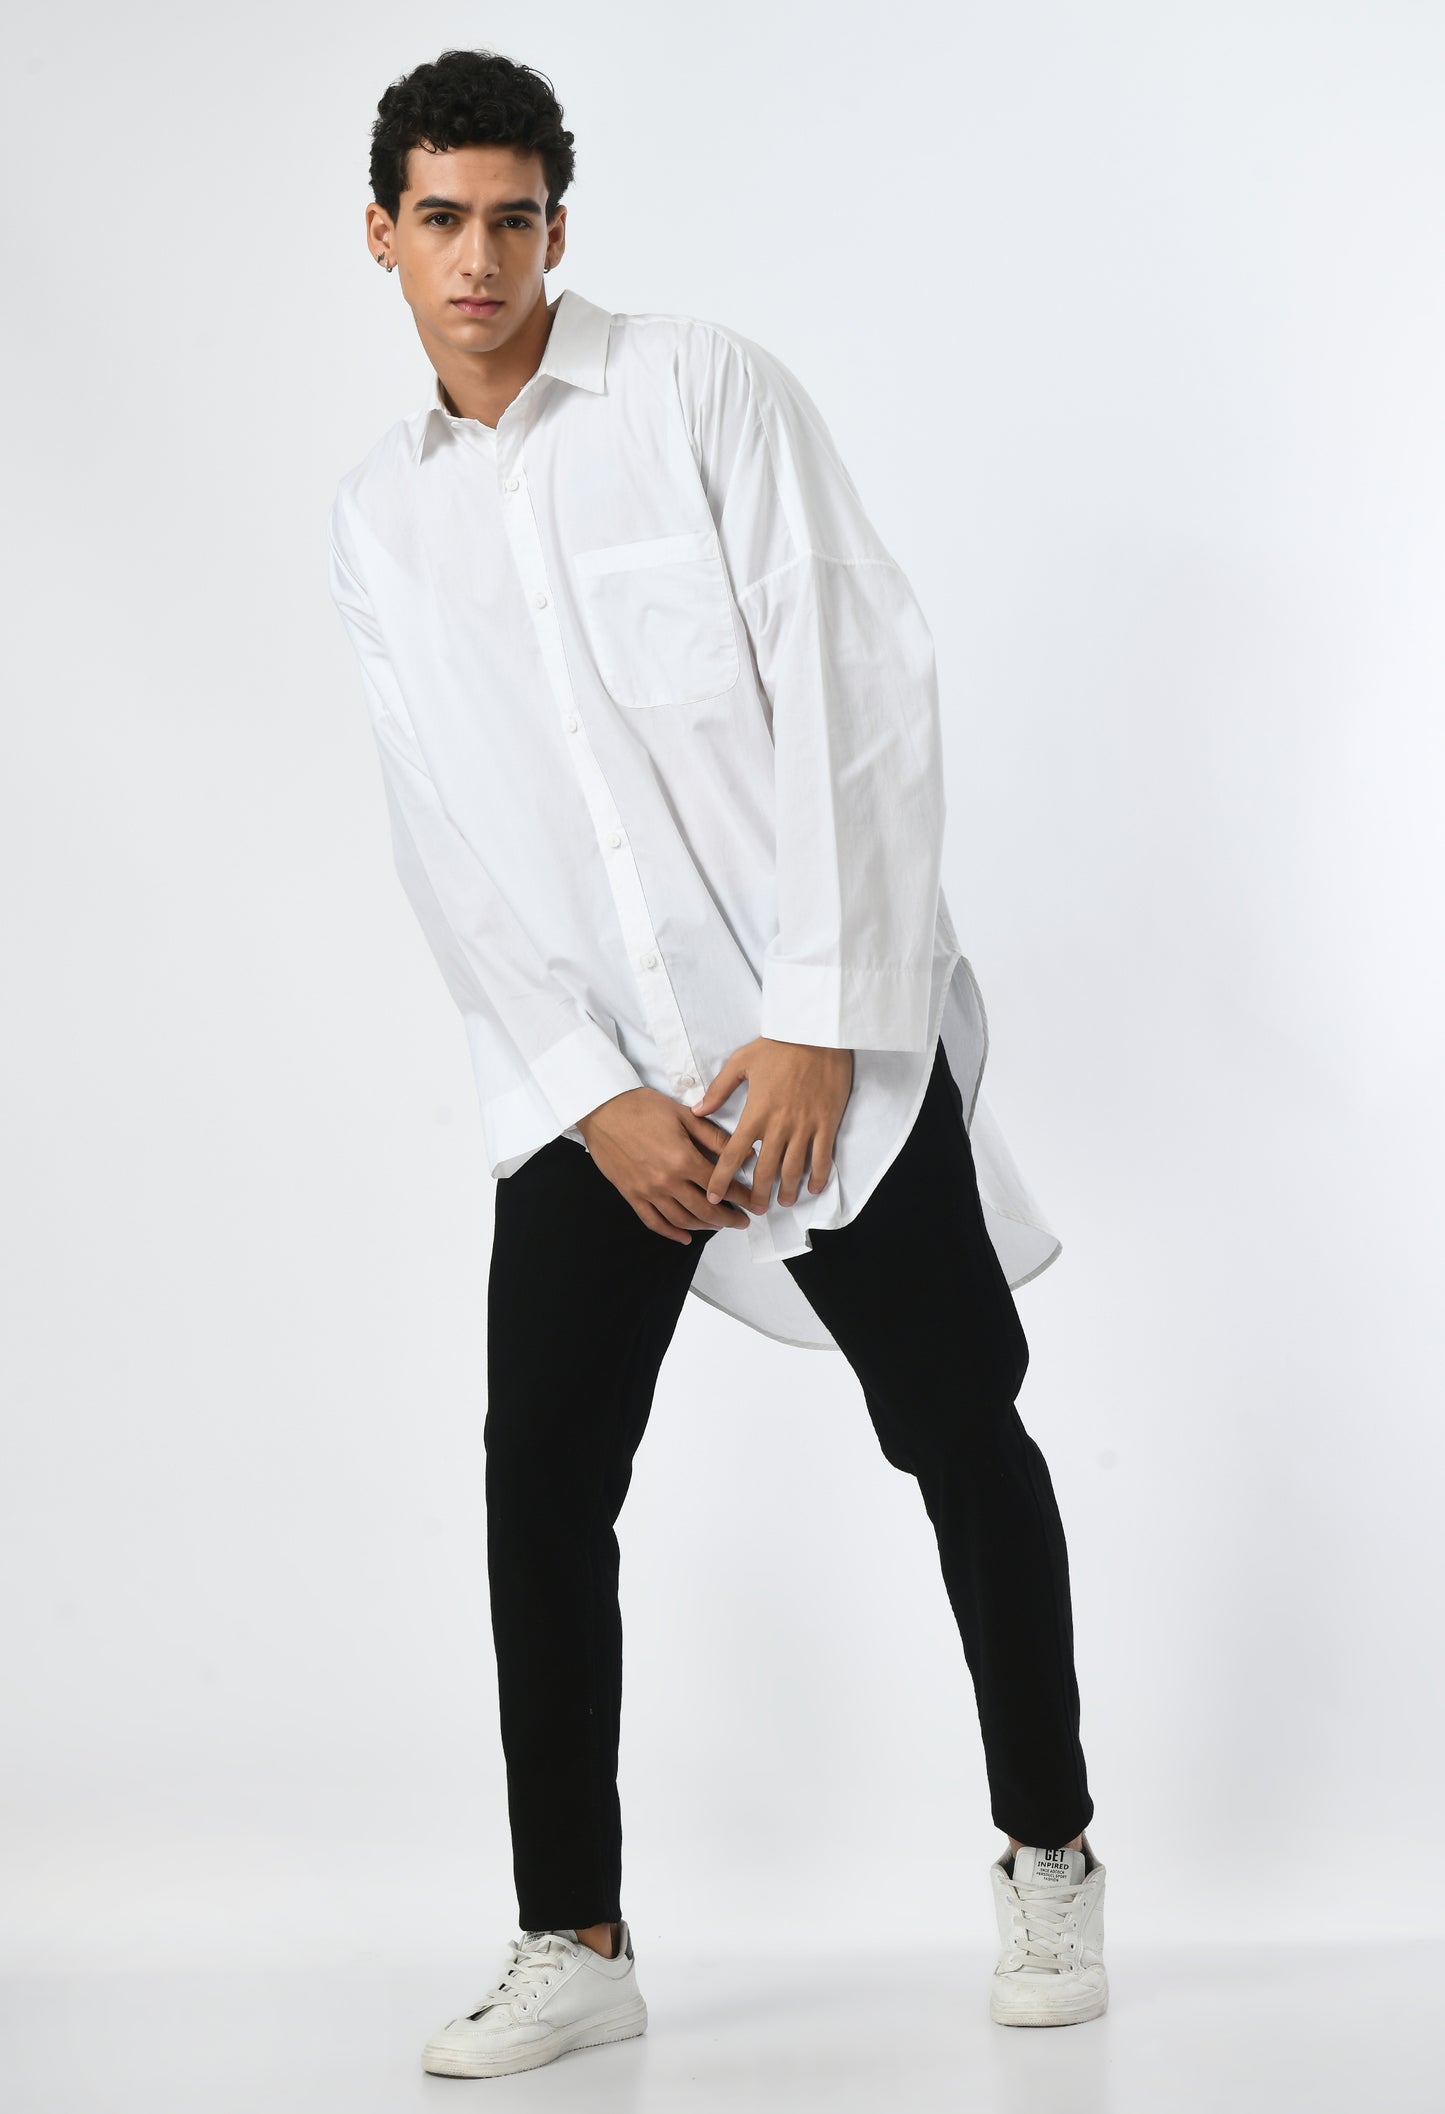 White unisex shirt with classic collar.